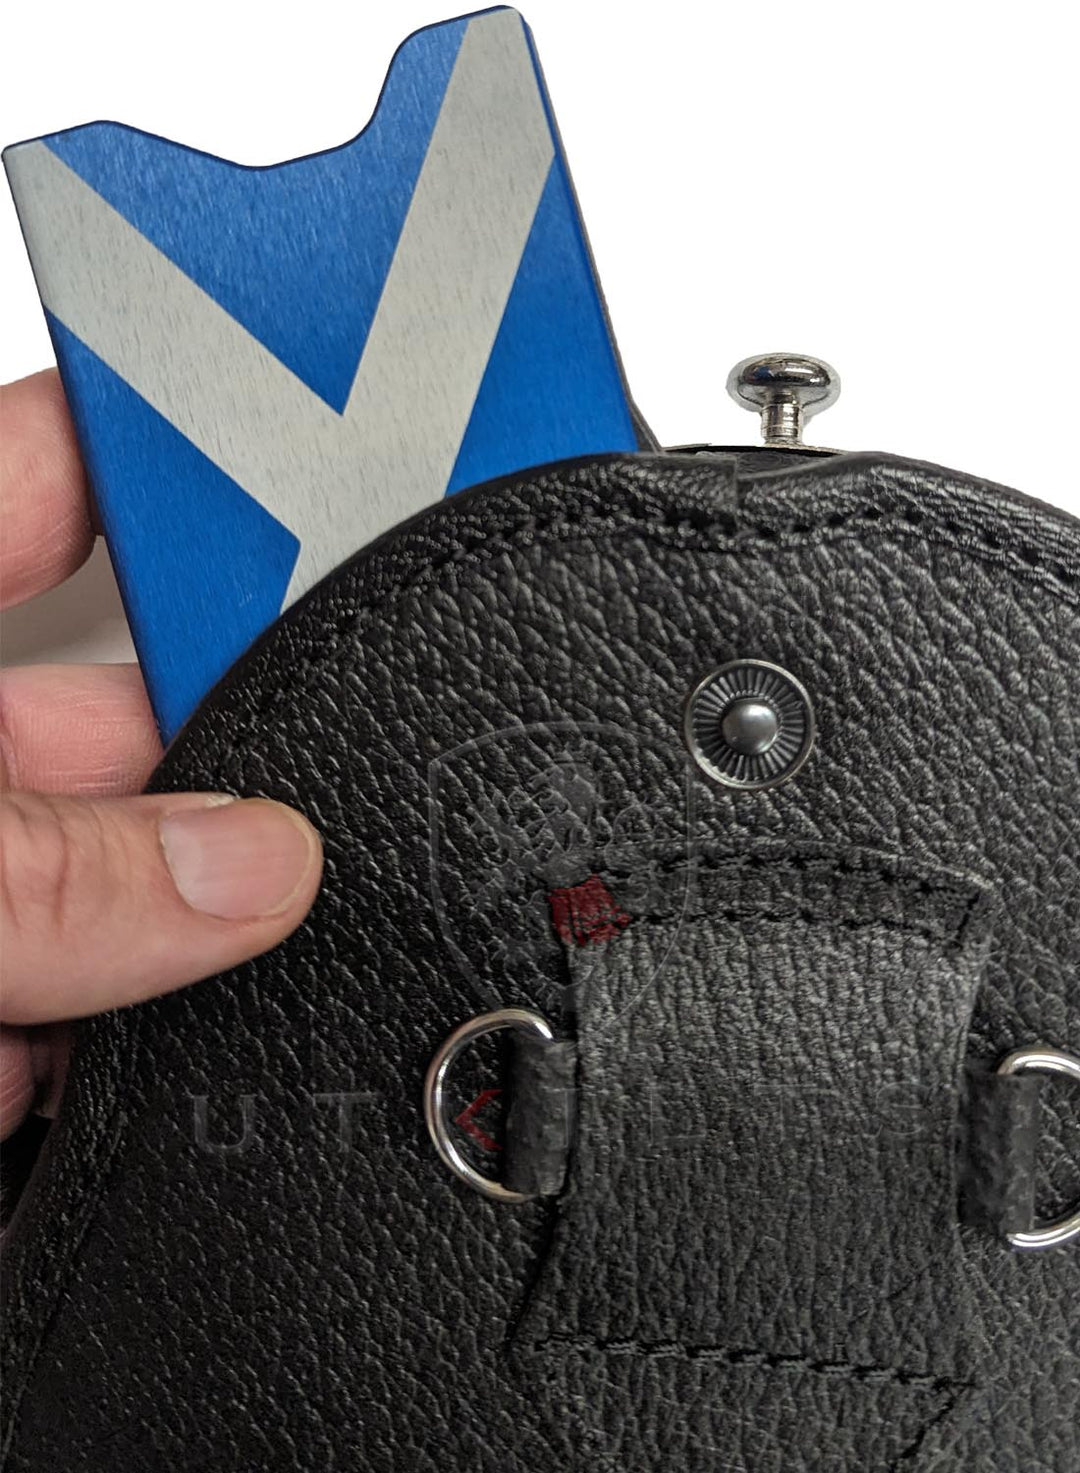 CLEARANCE! The Ultimate Kilt Wallet